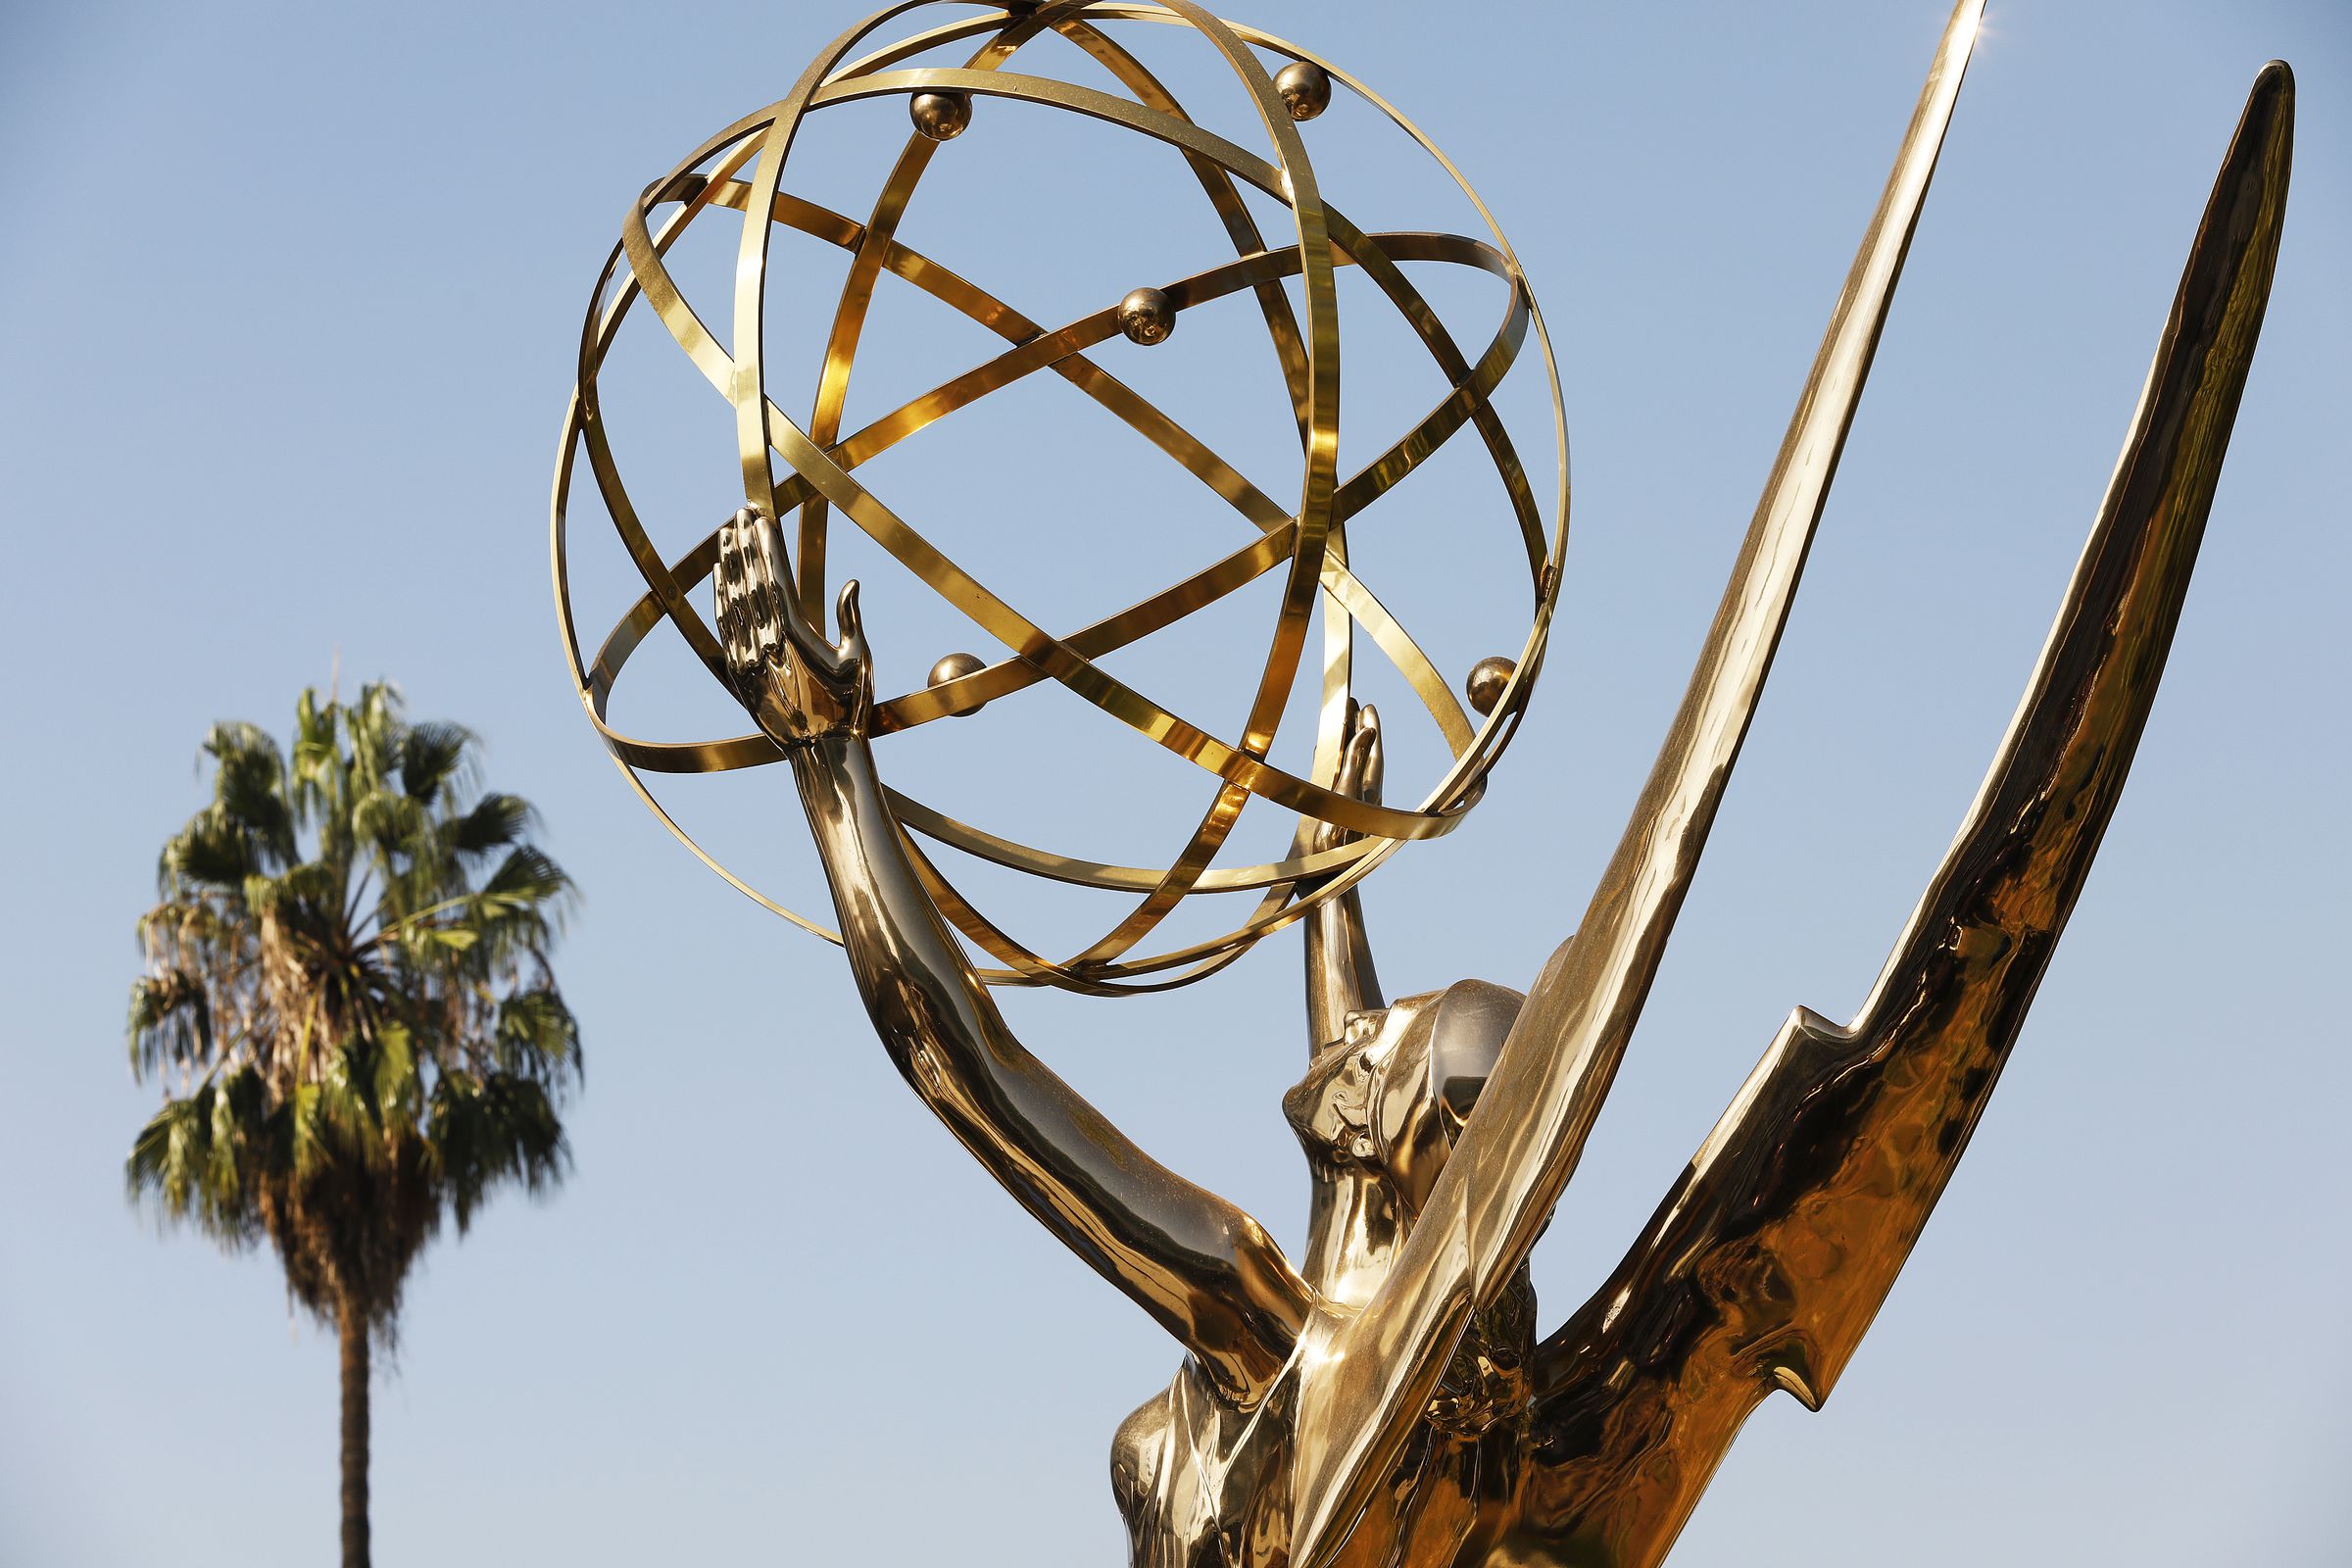 A photo showing the Emmy Awards statue next to a palm tree